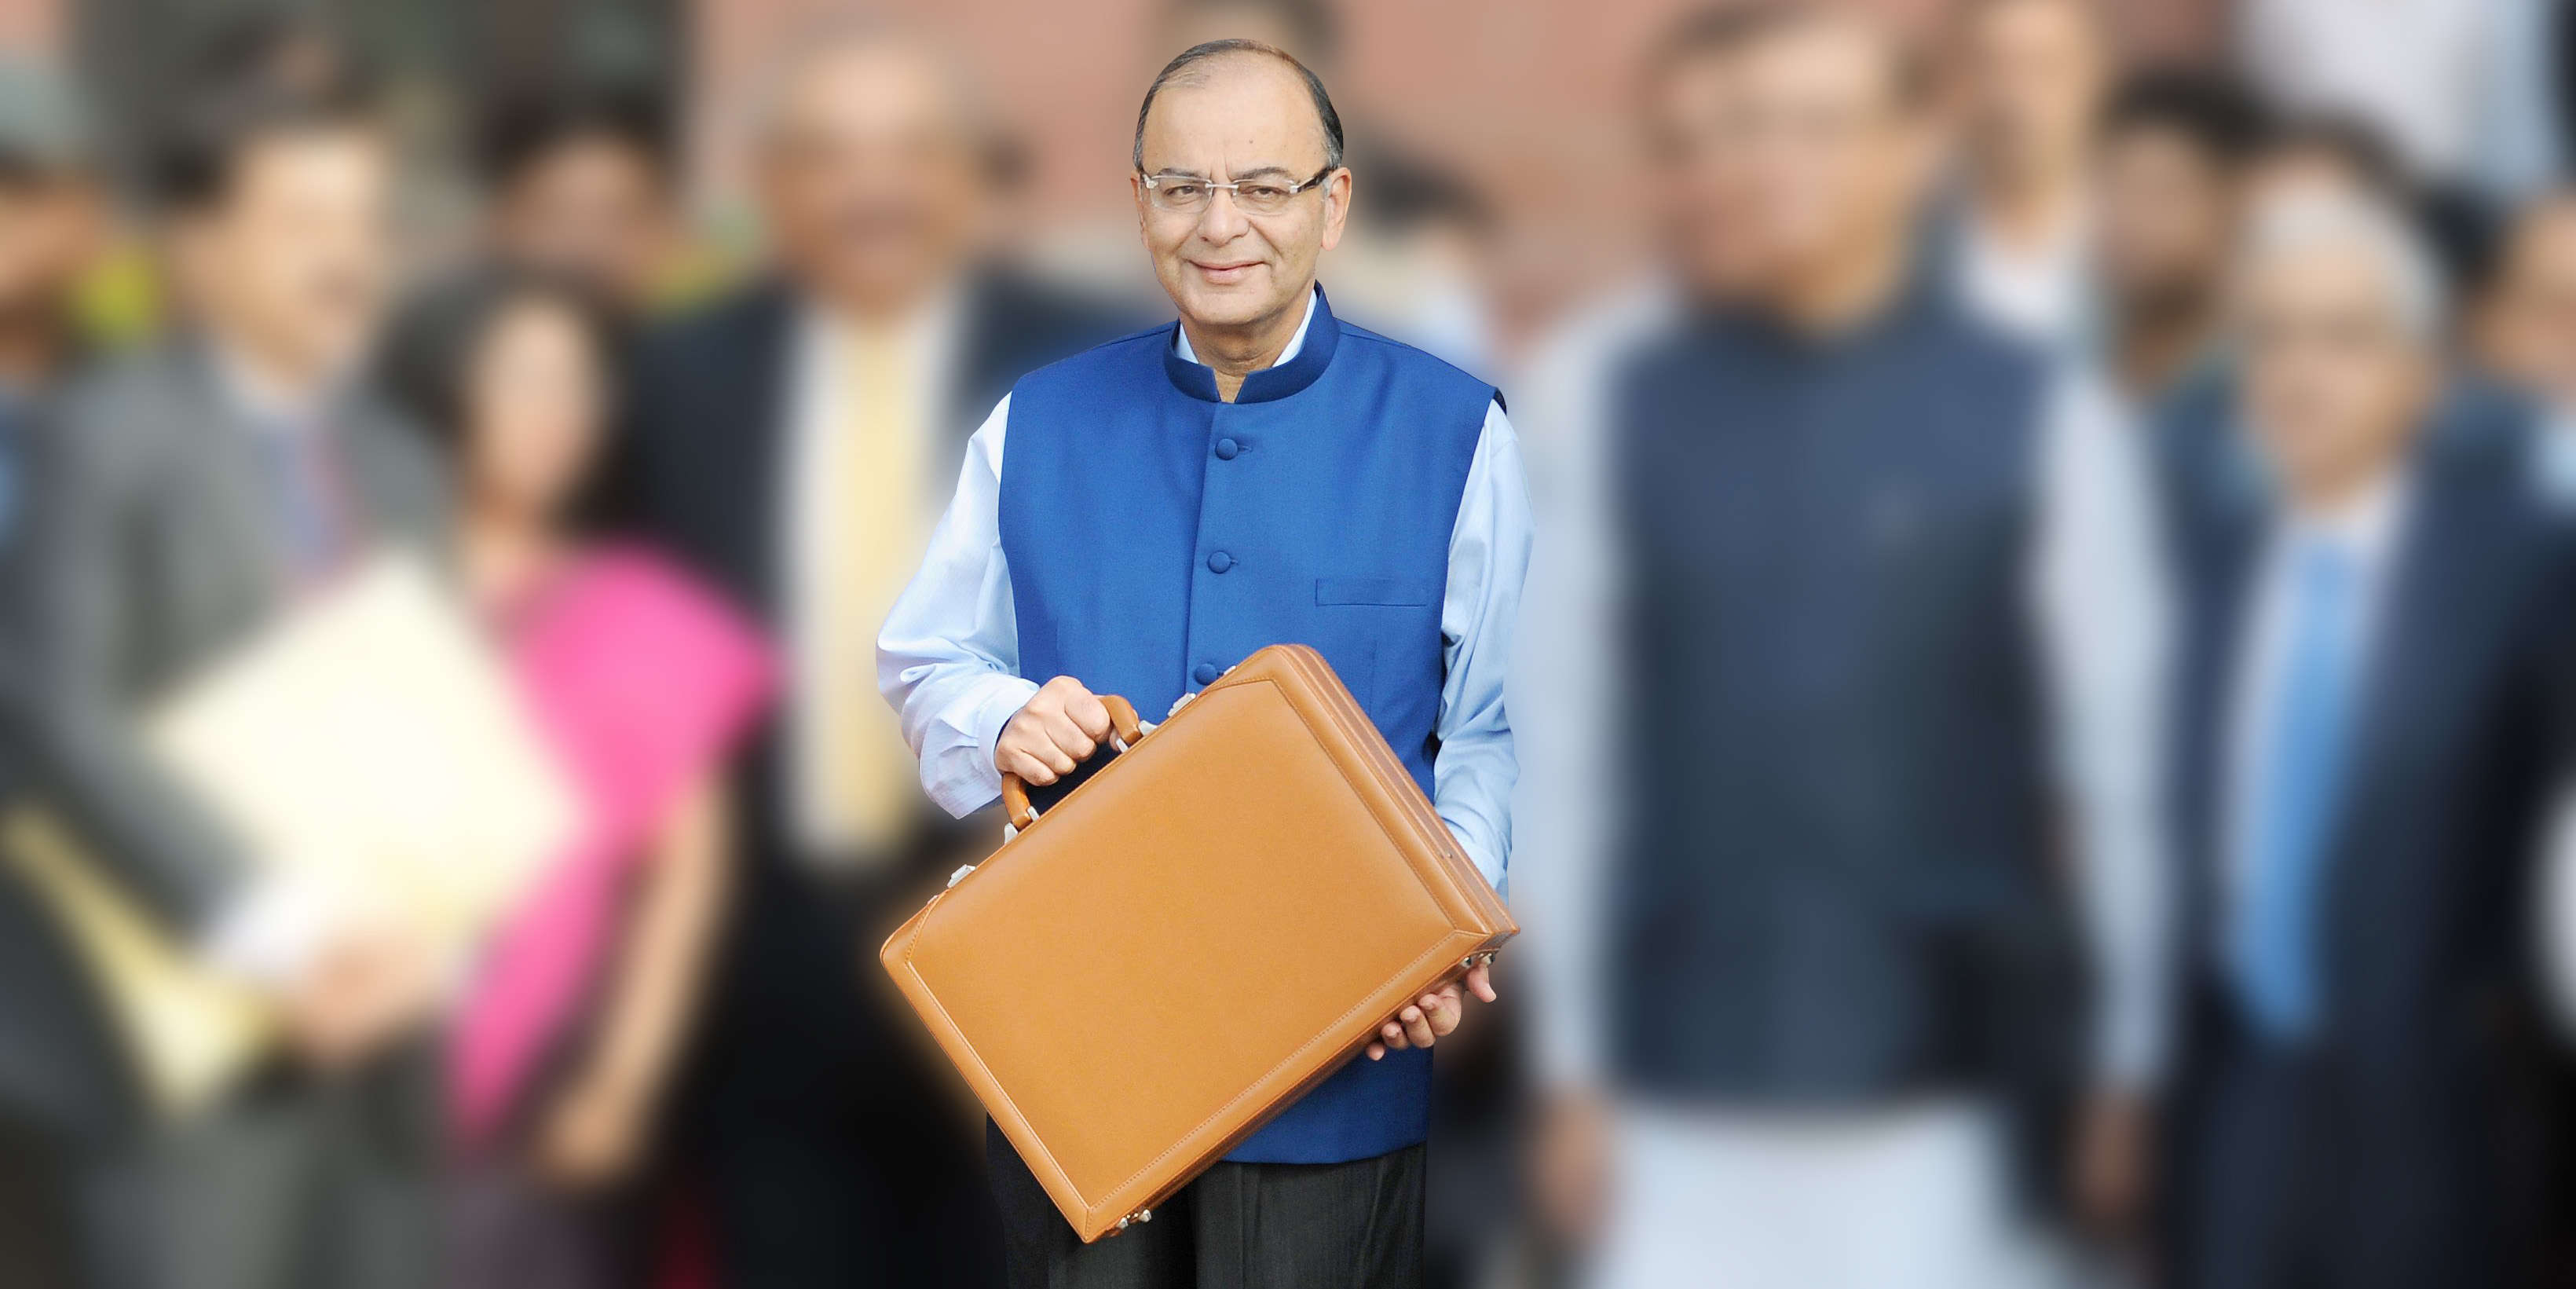 Finance Minister Arun Jaitley holds a briefcase containing union budget for the year 2015-16 as he leaves his office for Parliament to present the union budget in New Delhi. PHOTO BY ASHWANI NAGPAL